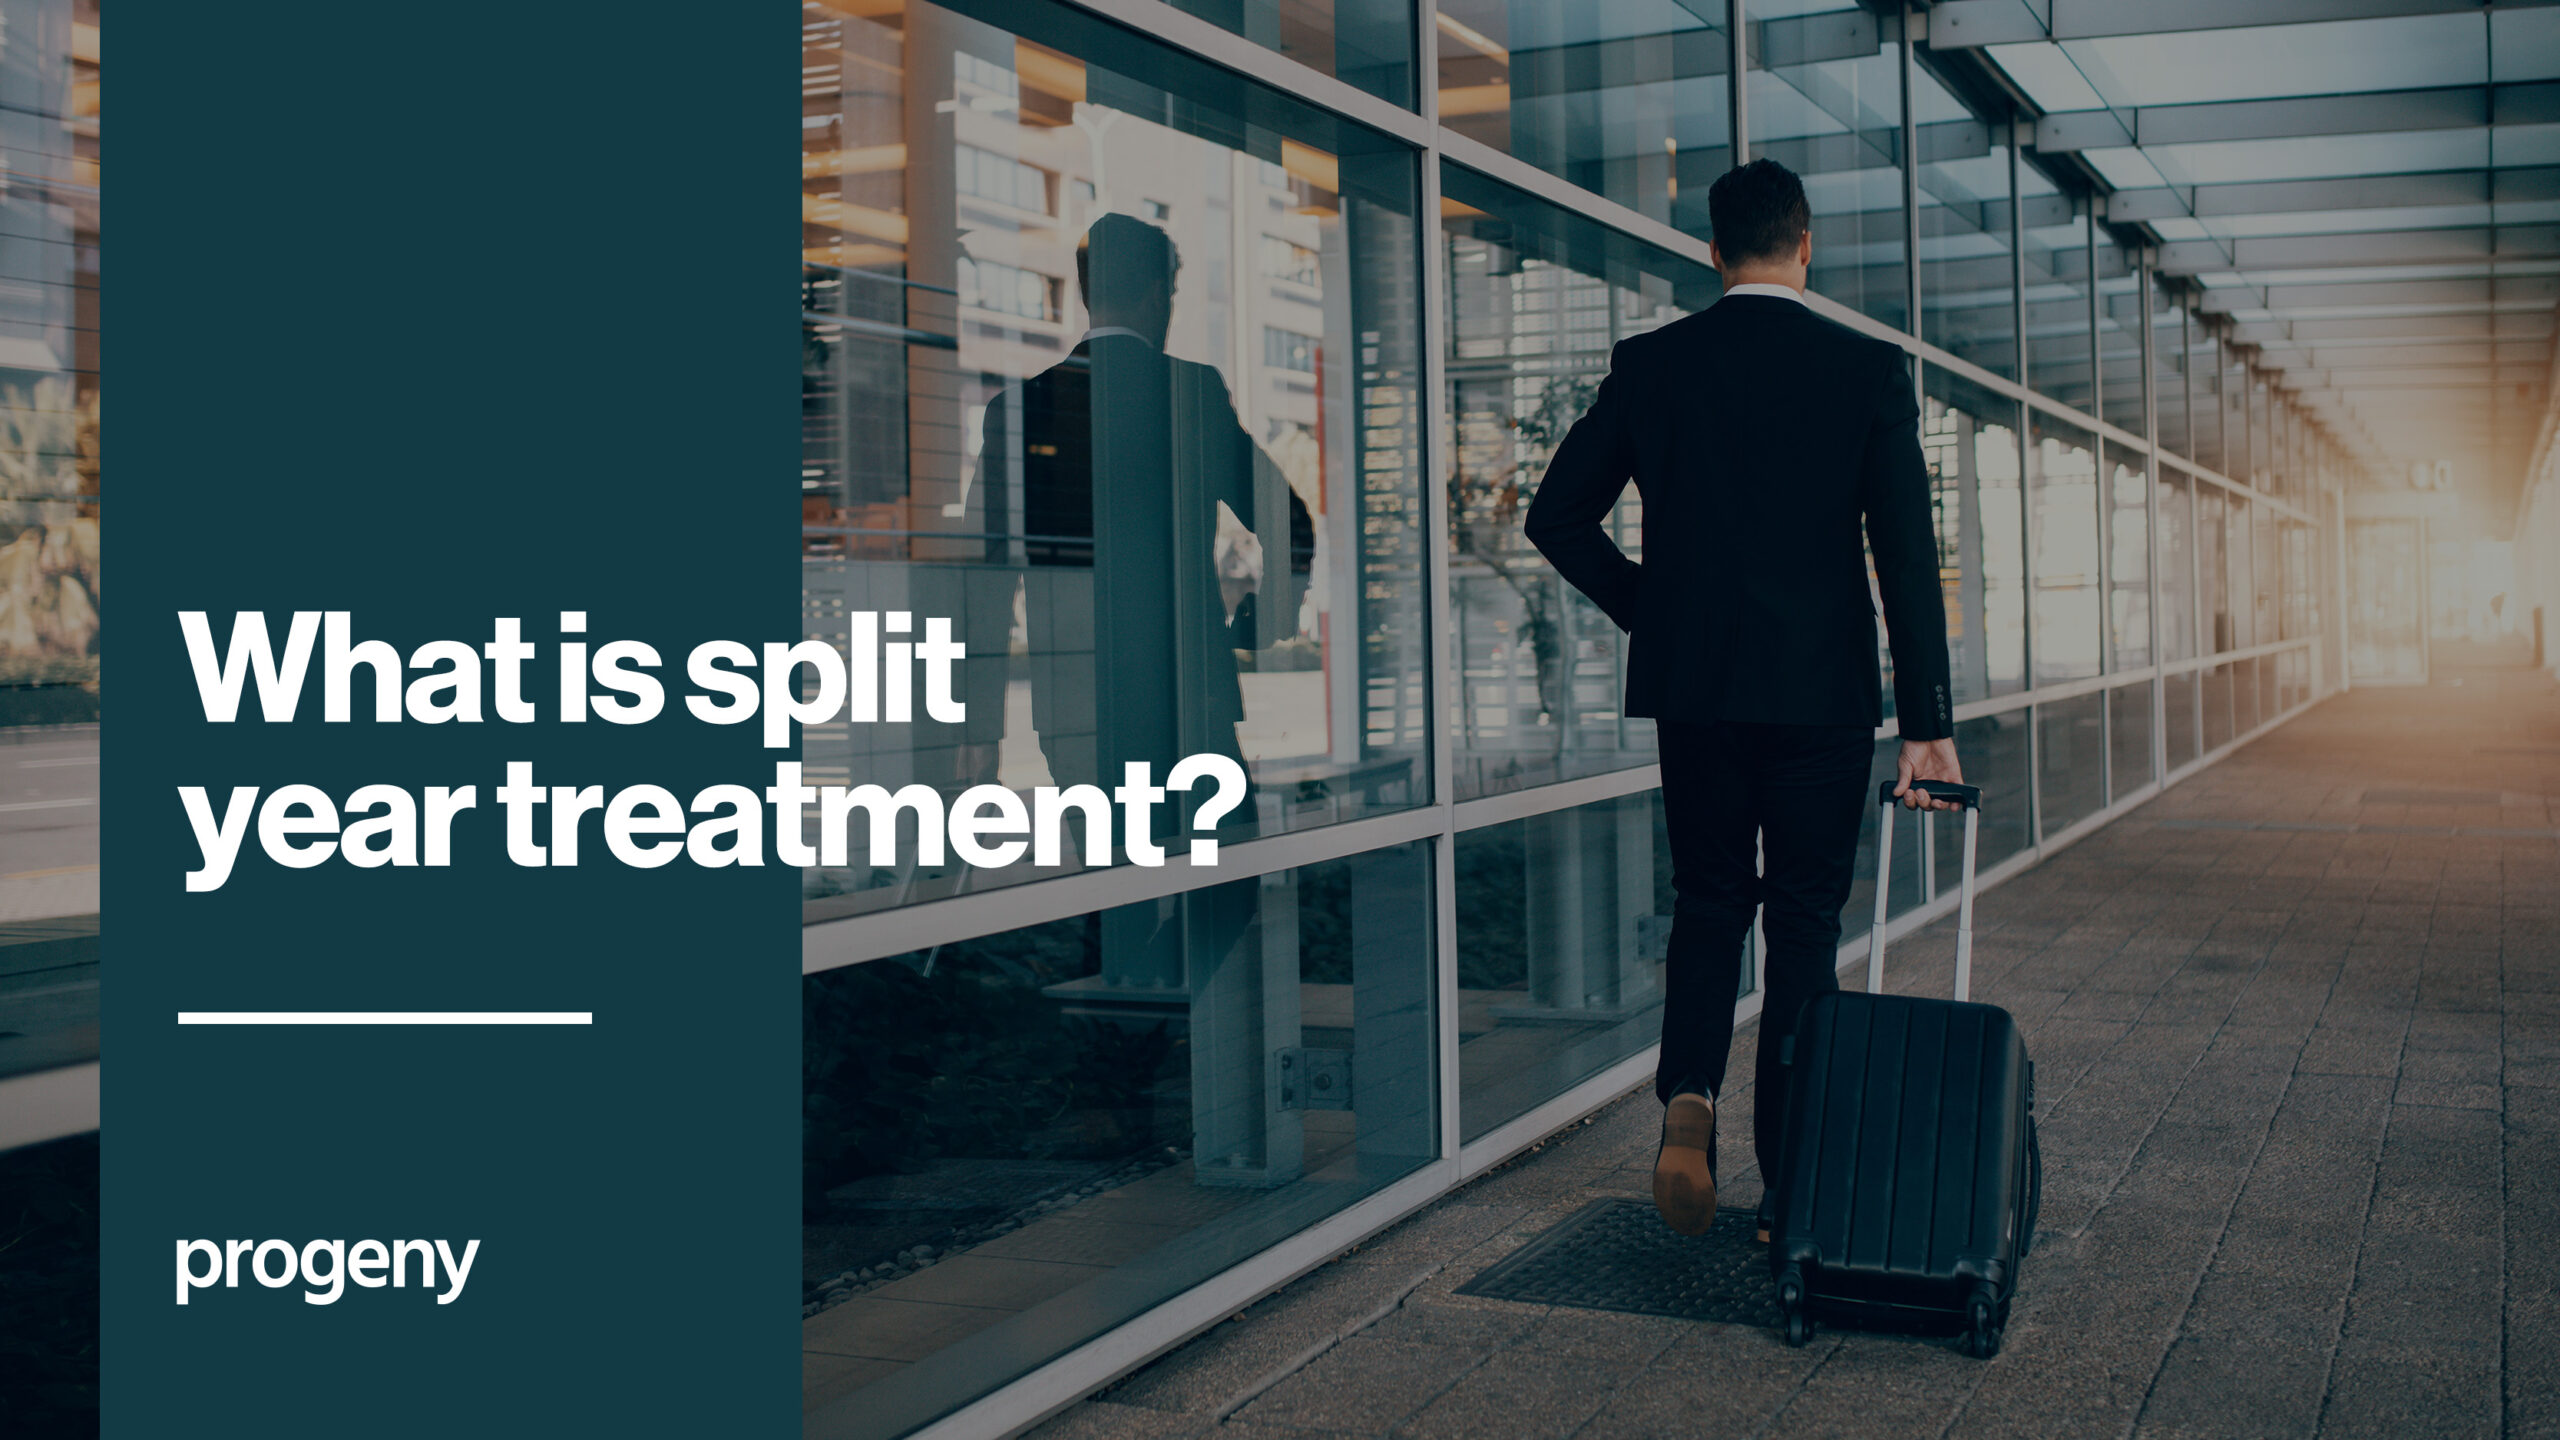 What is split year treatment